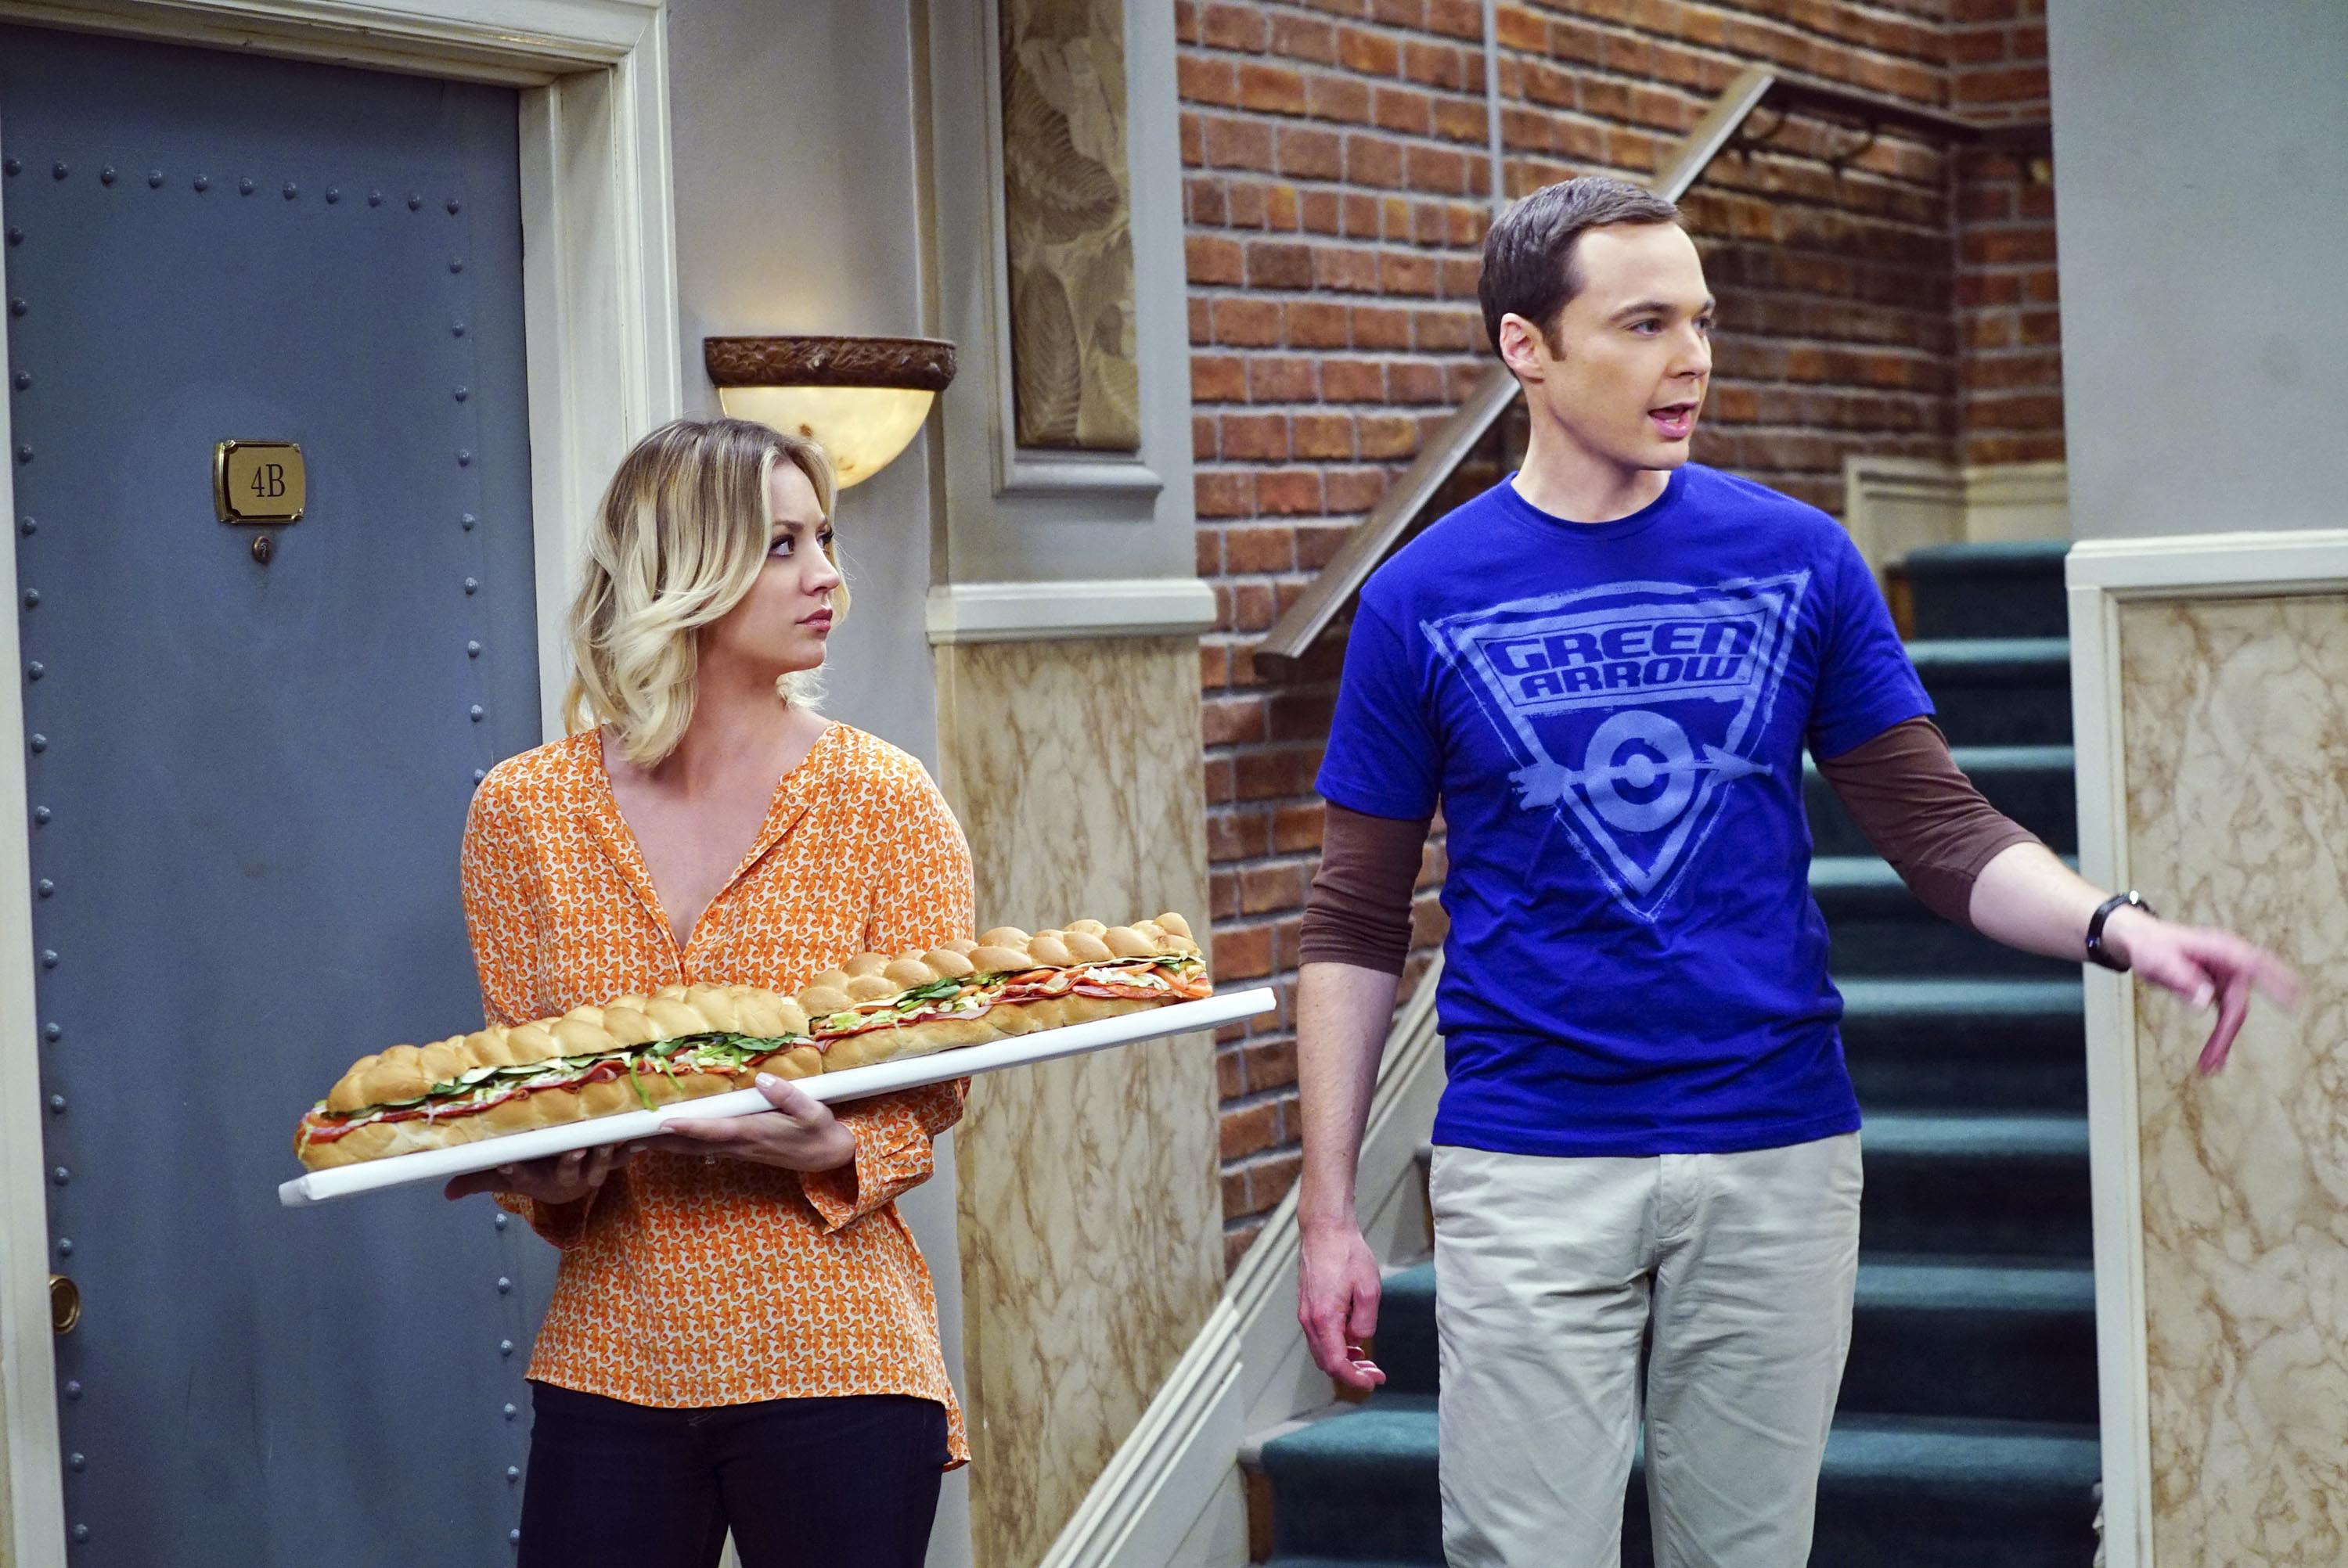 Kaley holding a long sub and standing next to Jim Parsons in the apartment building hallway in a scene from The Big Bang Theory